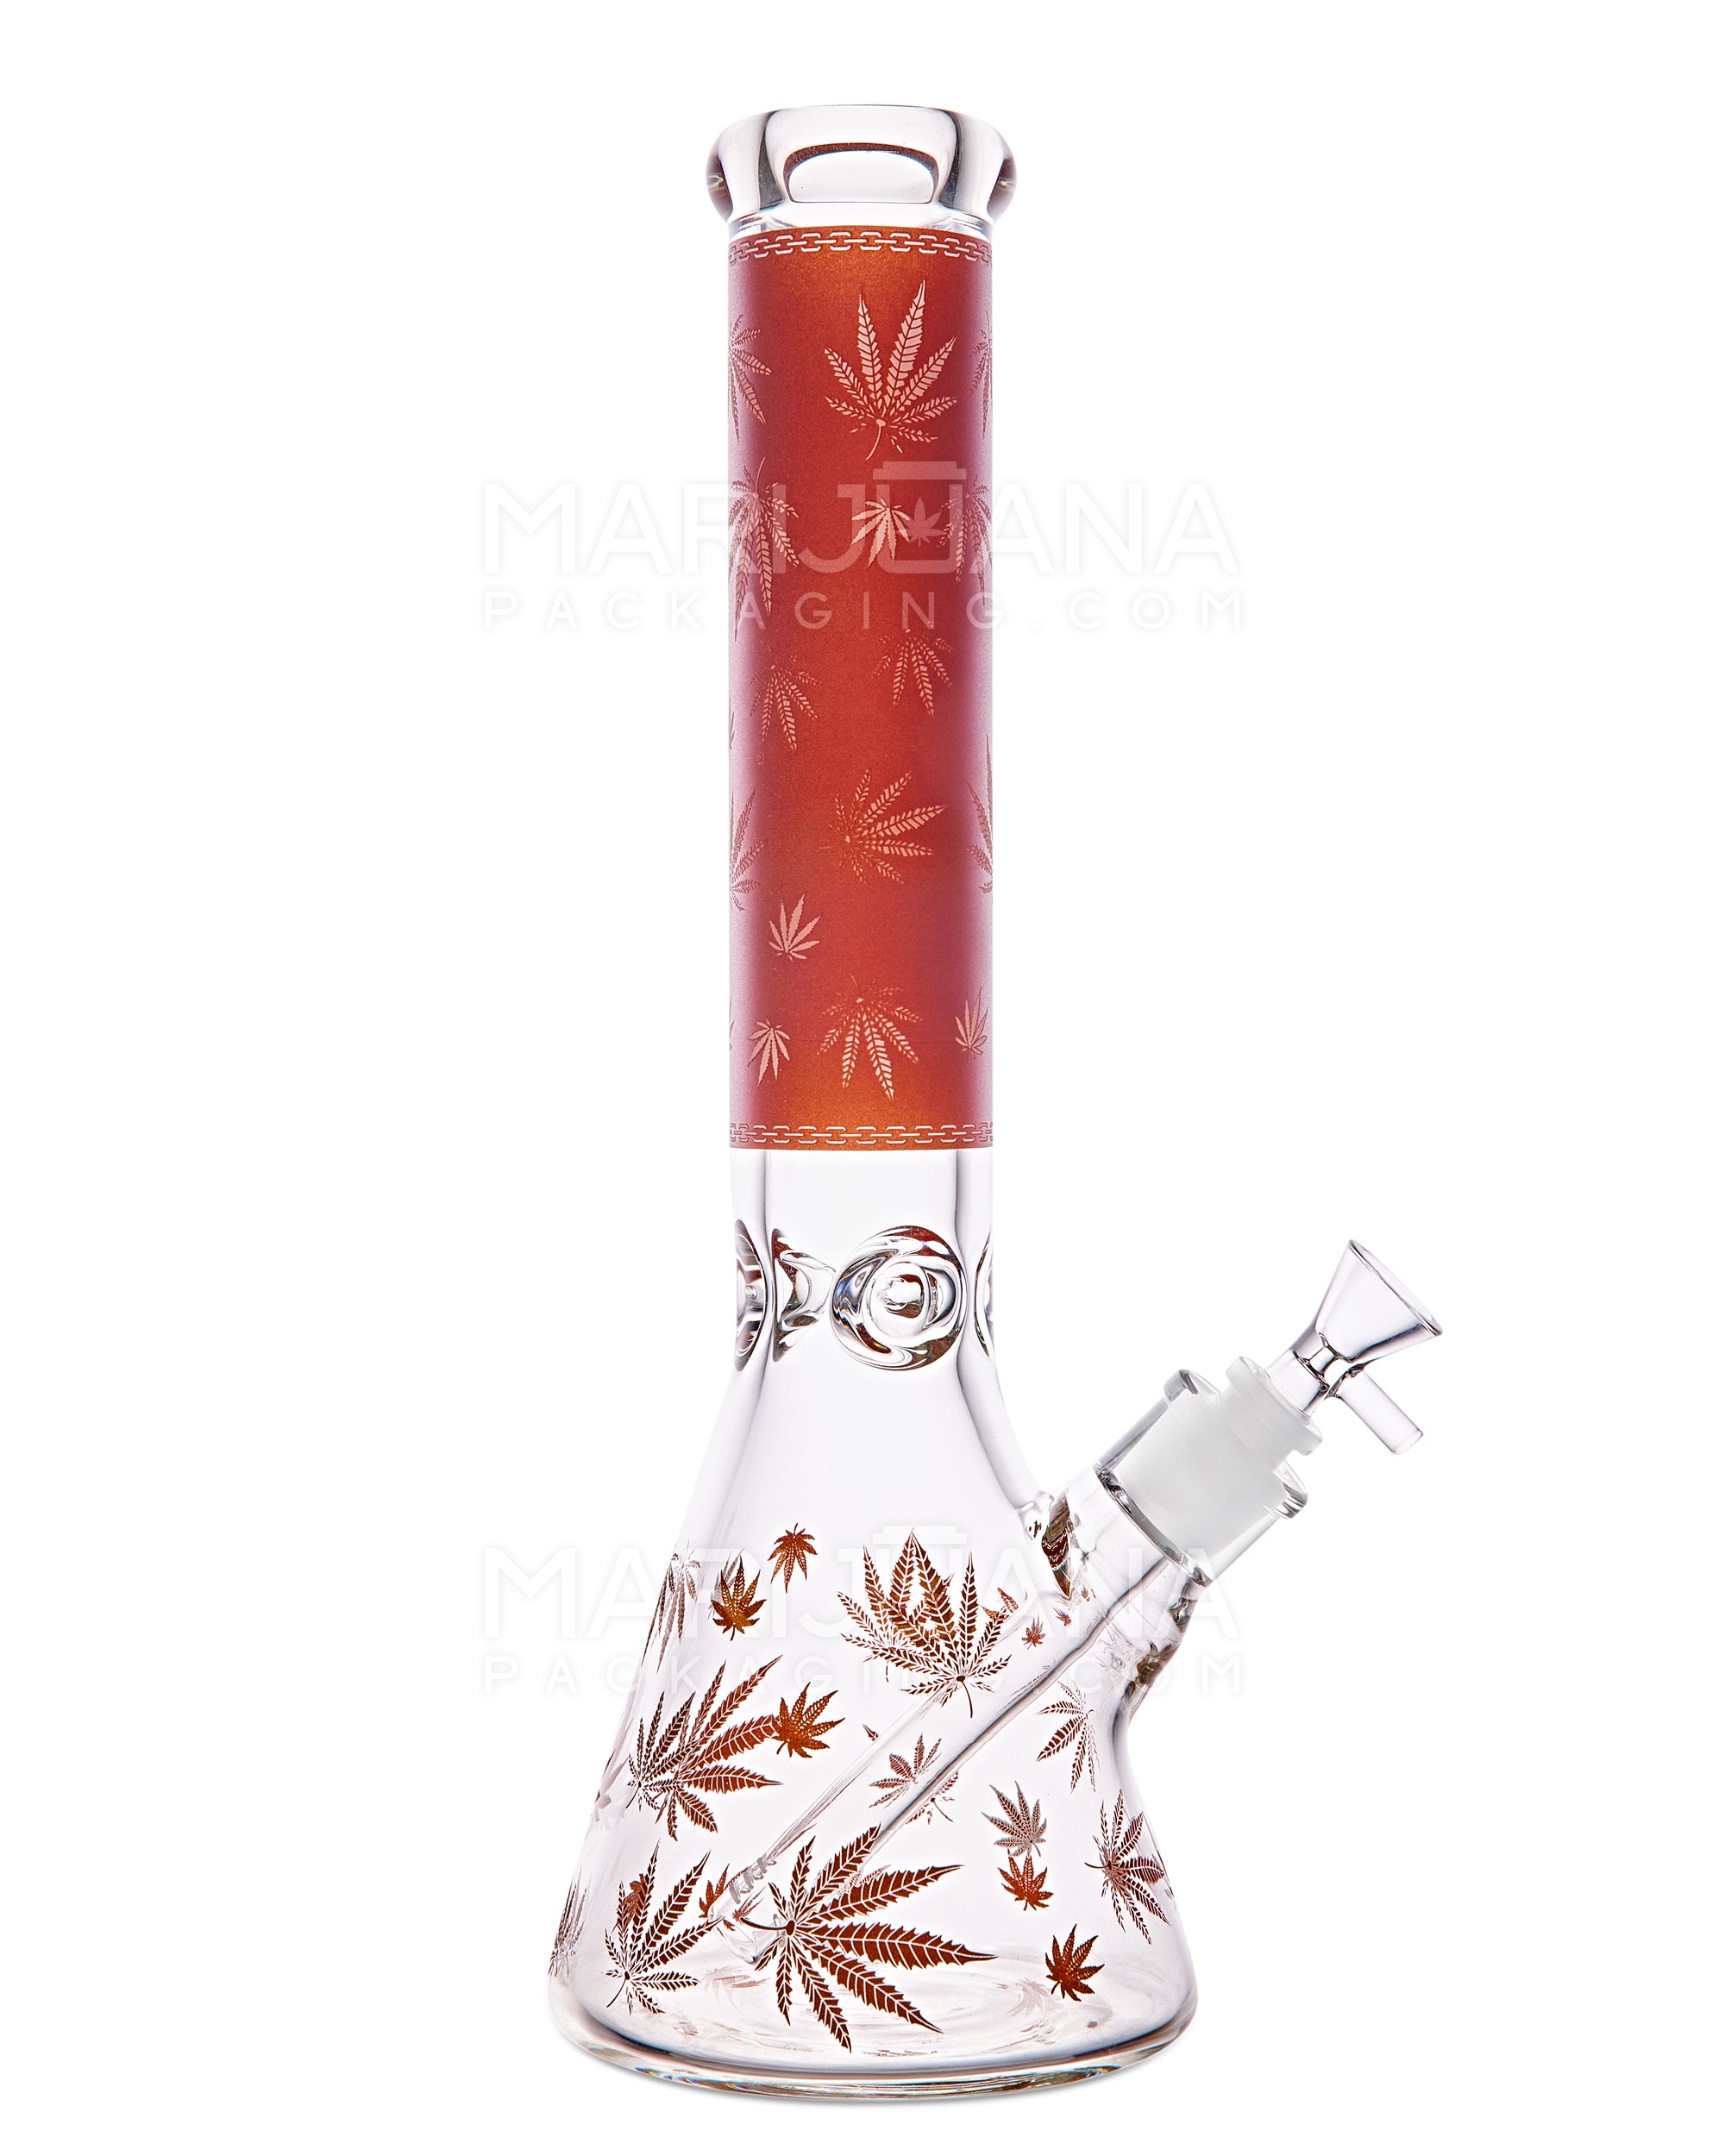 Straight Neck Decal Diffused Thick Glass Beaker Water Pipe w/ Ice Catcher | 14in Tall - 14mm Bowl - Rose Gold - 1